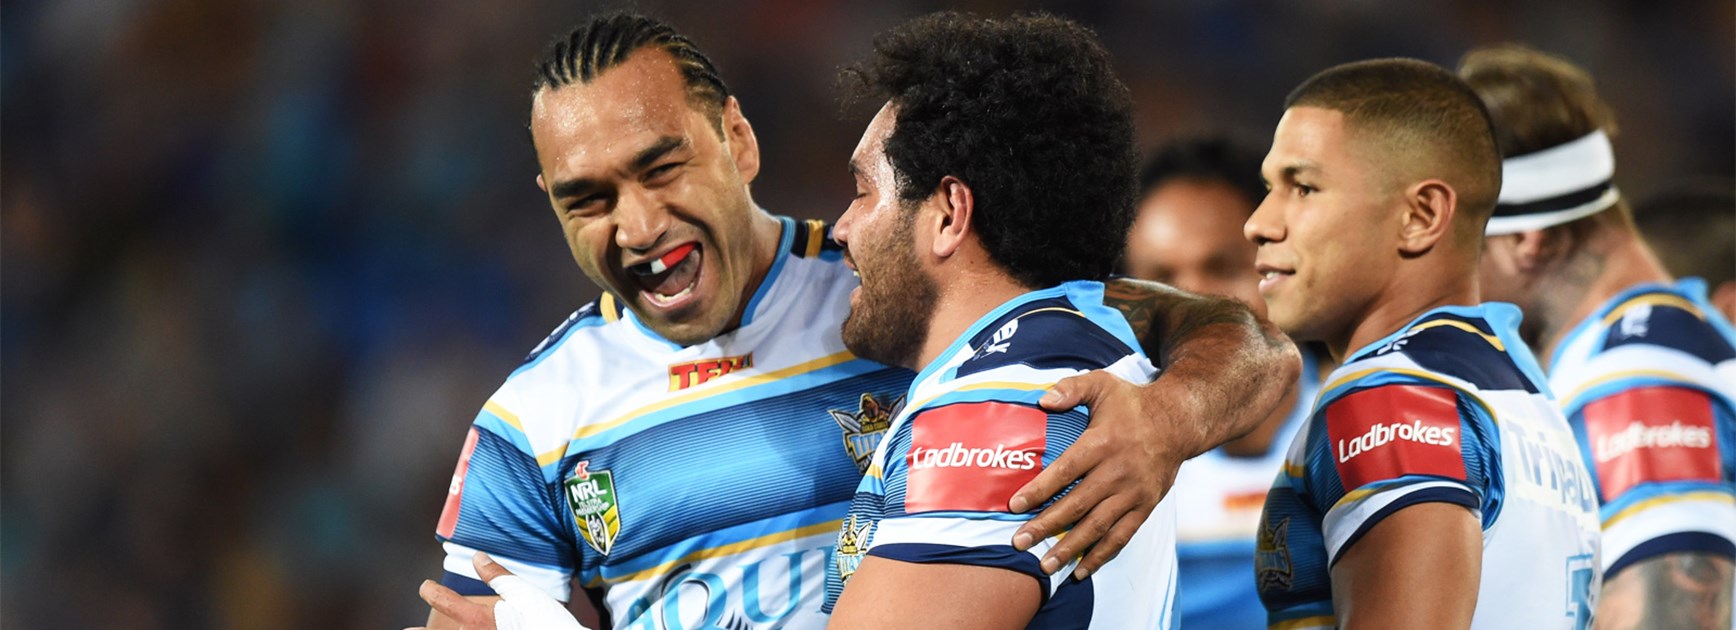 The Gold Coast Titans celebrate an early try against the Eels on Saturday.